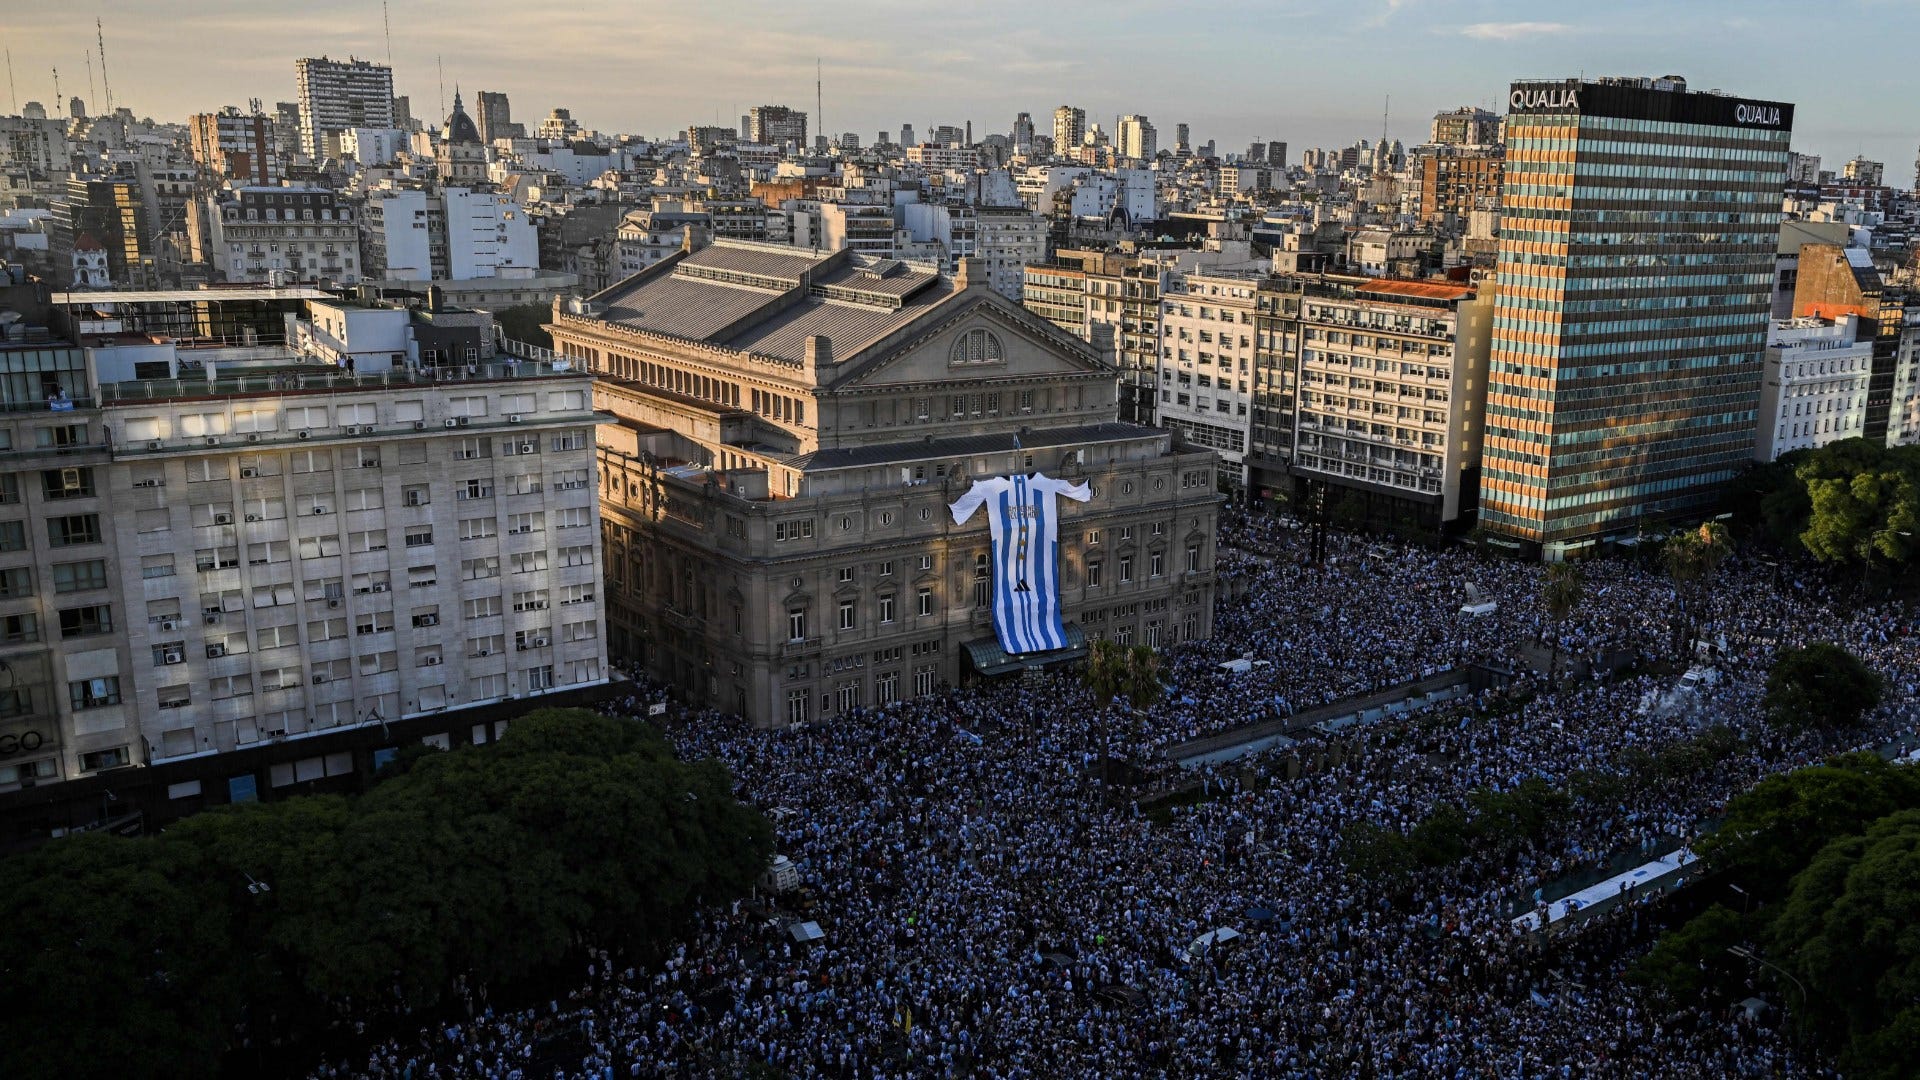 Soccer Cities' ultimate guide to the authentic Buenos Aires football